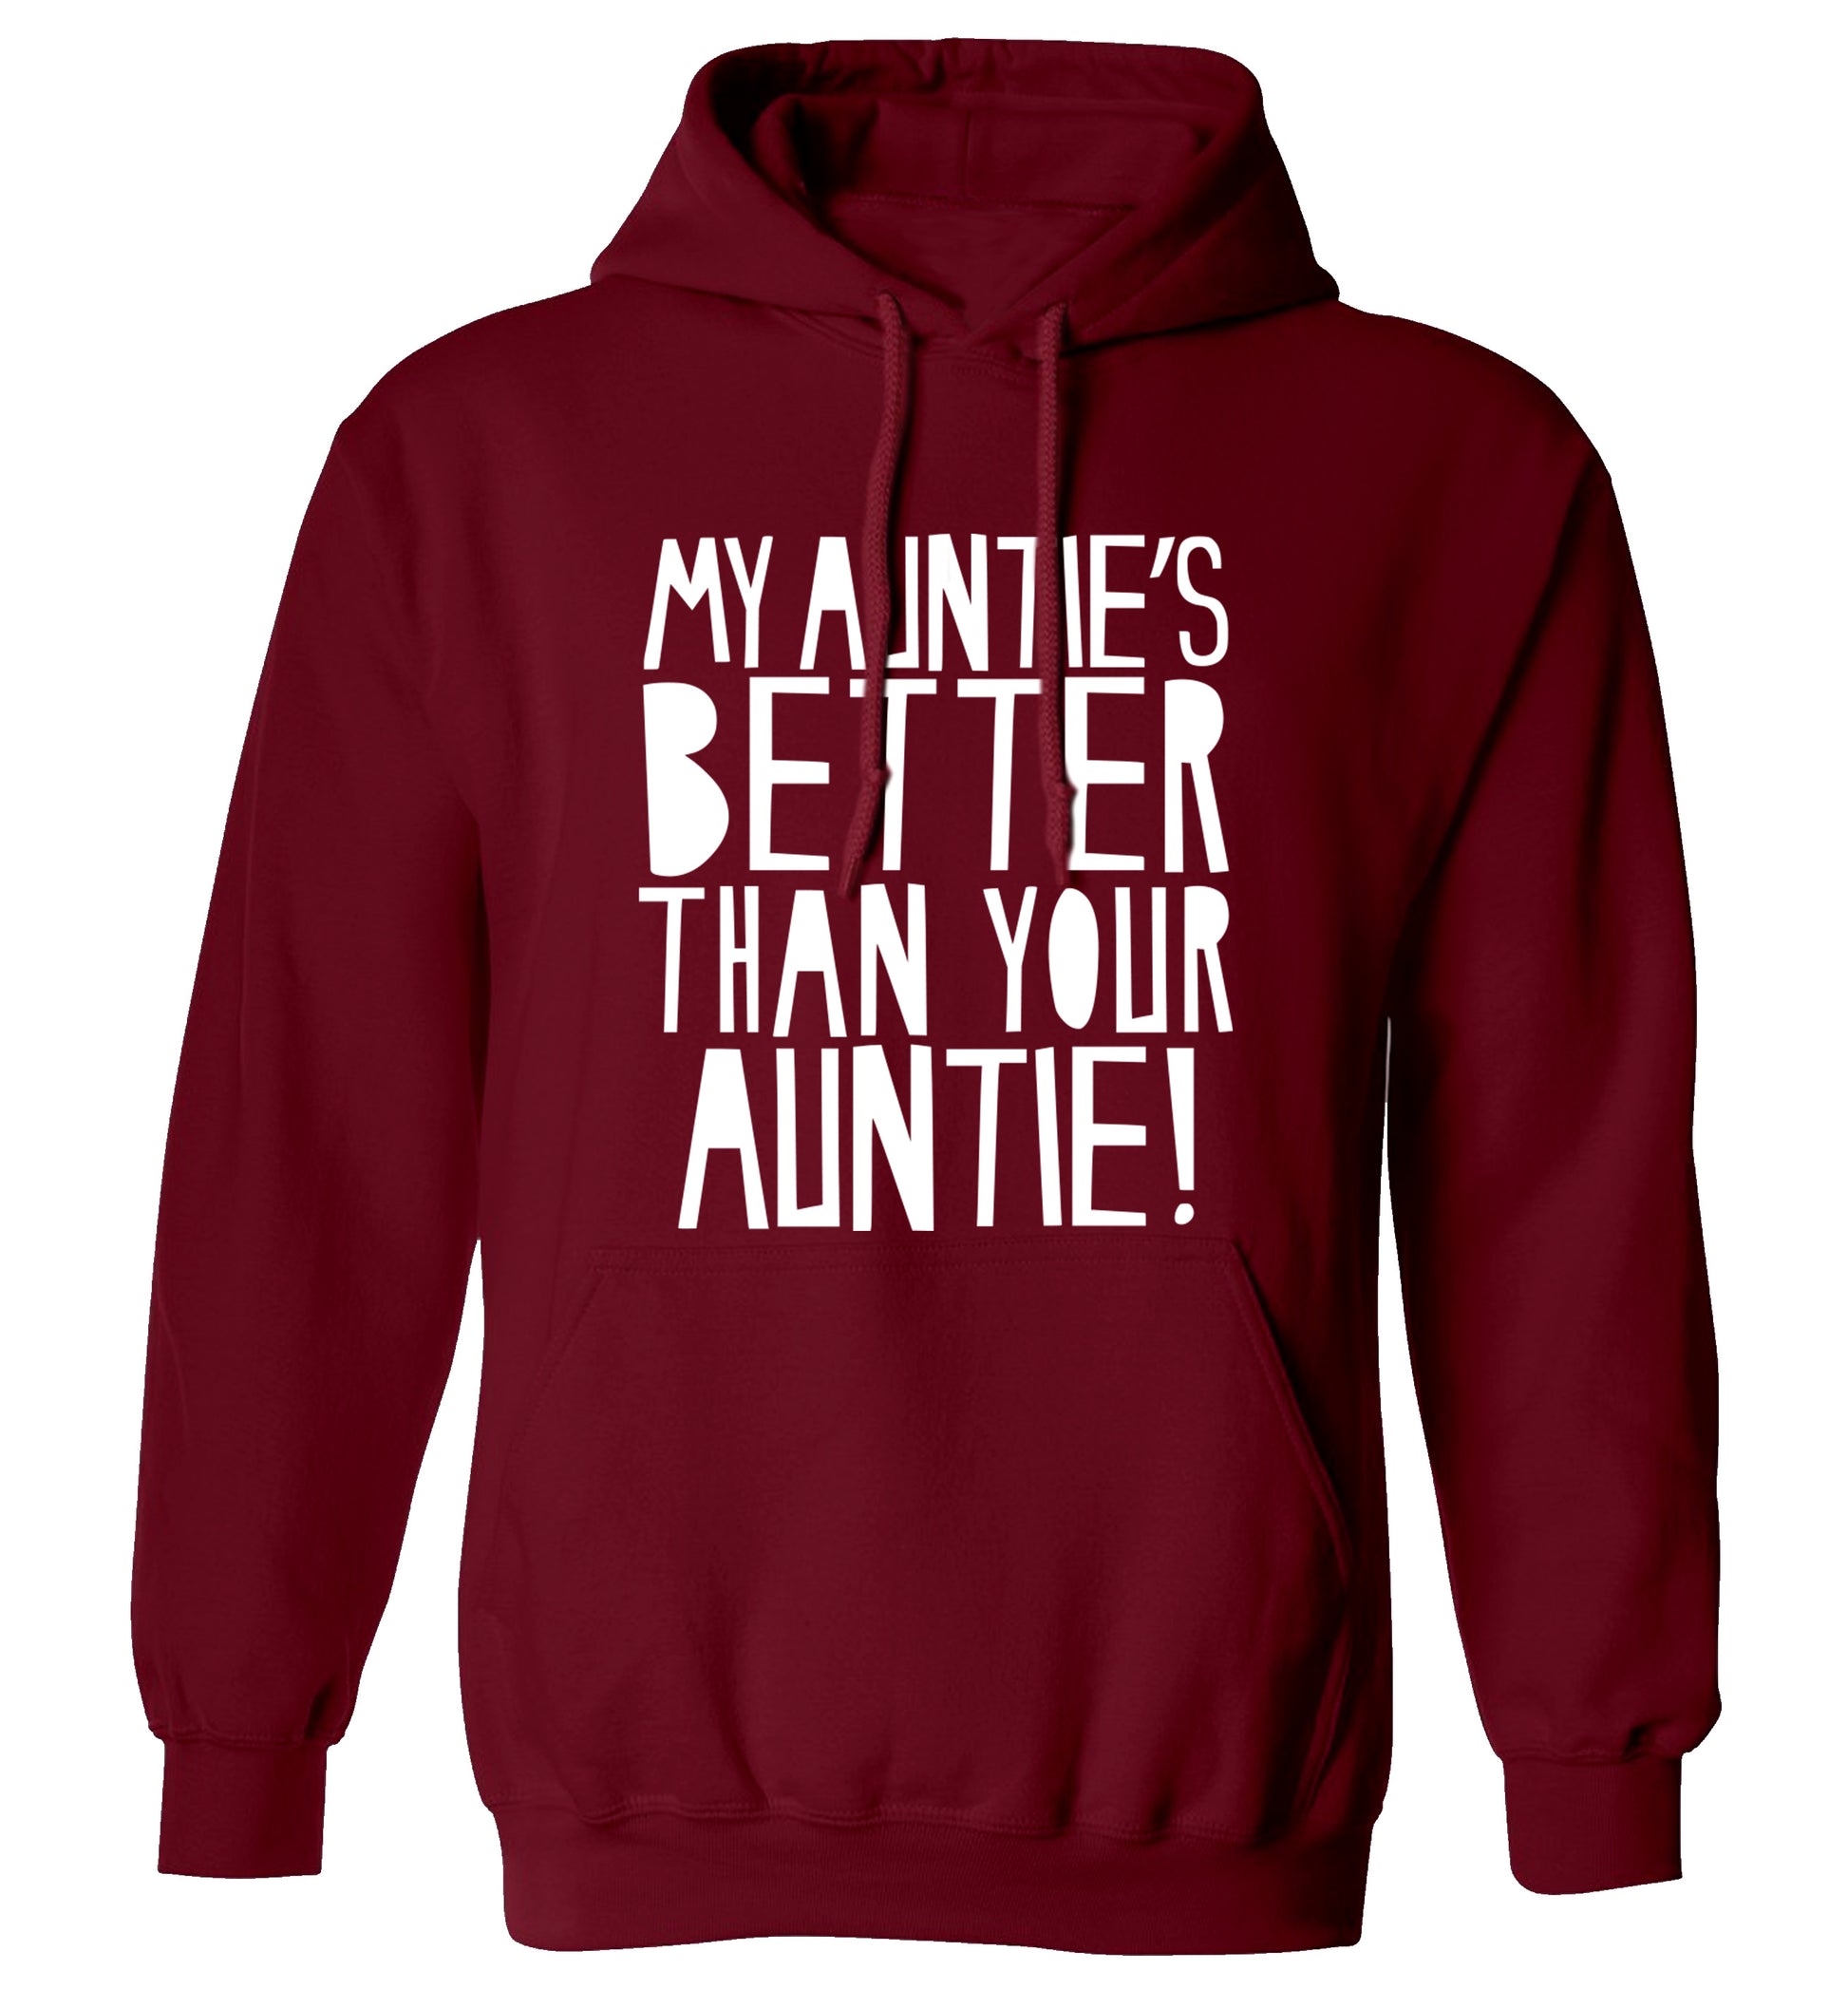 My auntie's better than your auntie adults unisex maroon hoodie 2XL